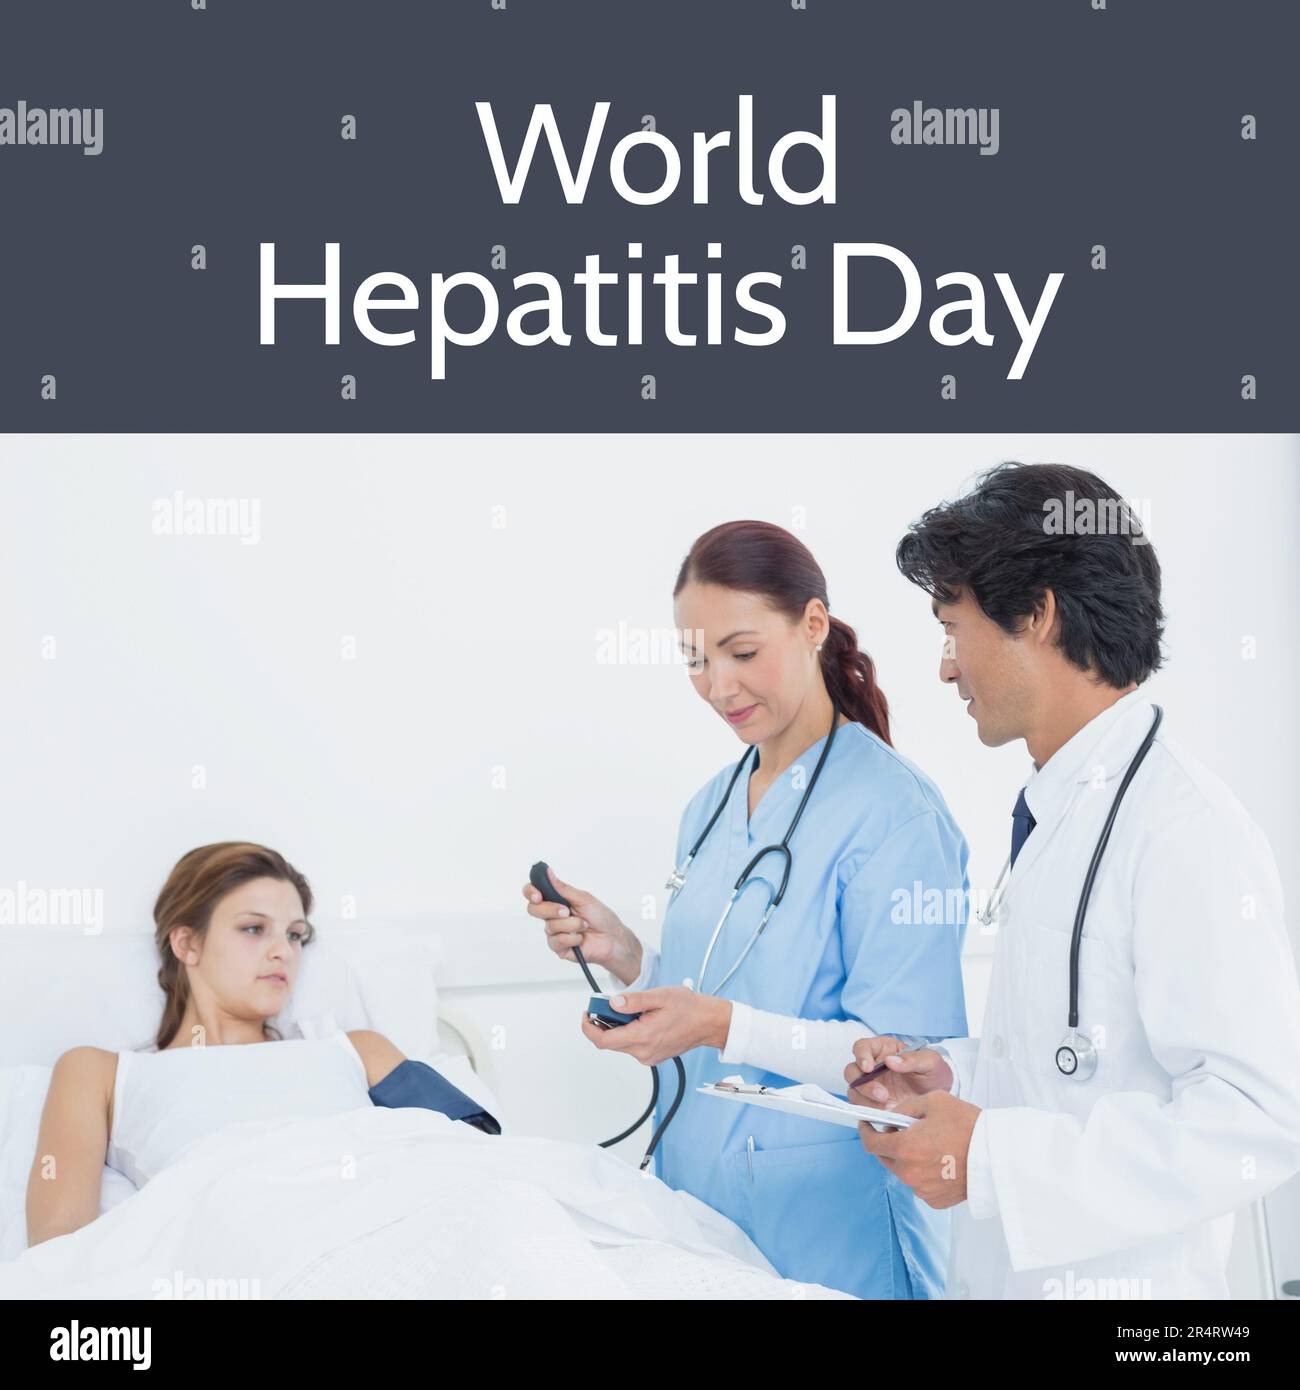 Composition of world hepatitis day text over caucasian female patient and diverse doctors Stock Photo